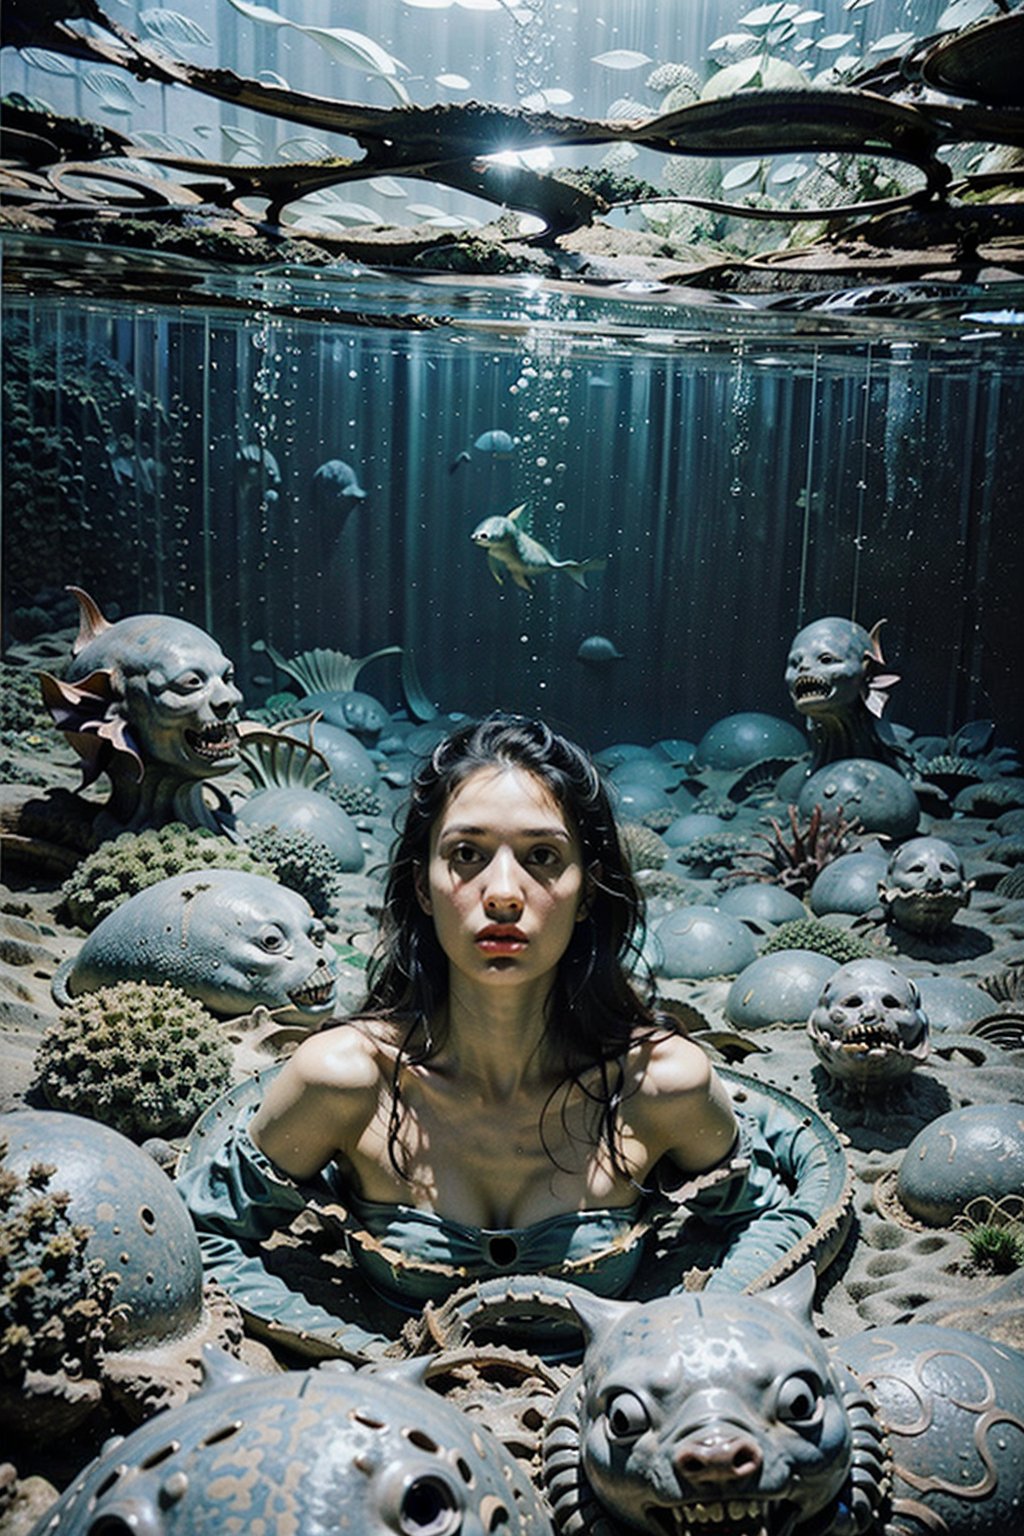 "Underwater" is a science fiction horror movie. The story follows mechanical engineer Norah Price as she leads a team on a mini-submarine through a dark and dangerous abyss, when they encounter a mysterious and deadly mermaid, which complicates their mission. The film is known for its tense atmosphere, claustrophobic scenes and thrilling suspense. It combines elements of survival horror with deep-sea adventure to create a unique cinematic experience.